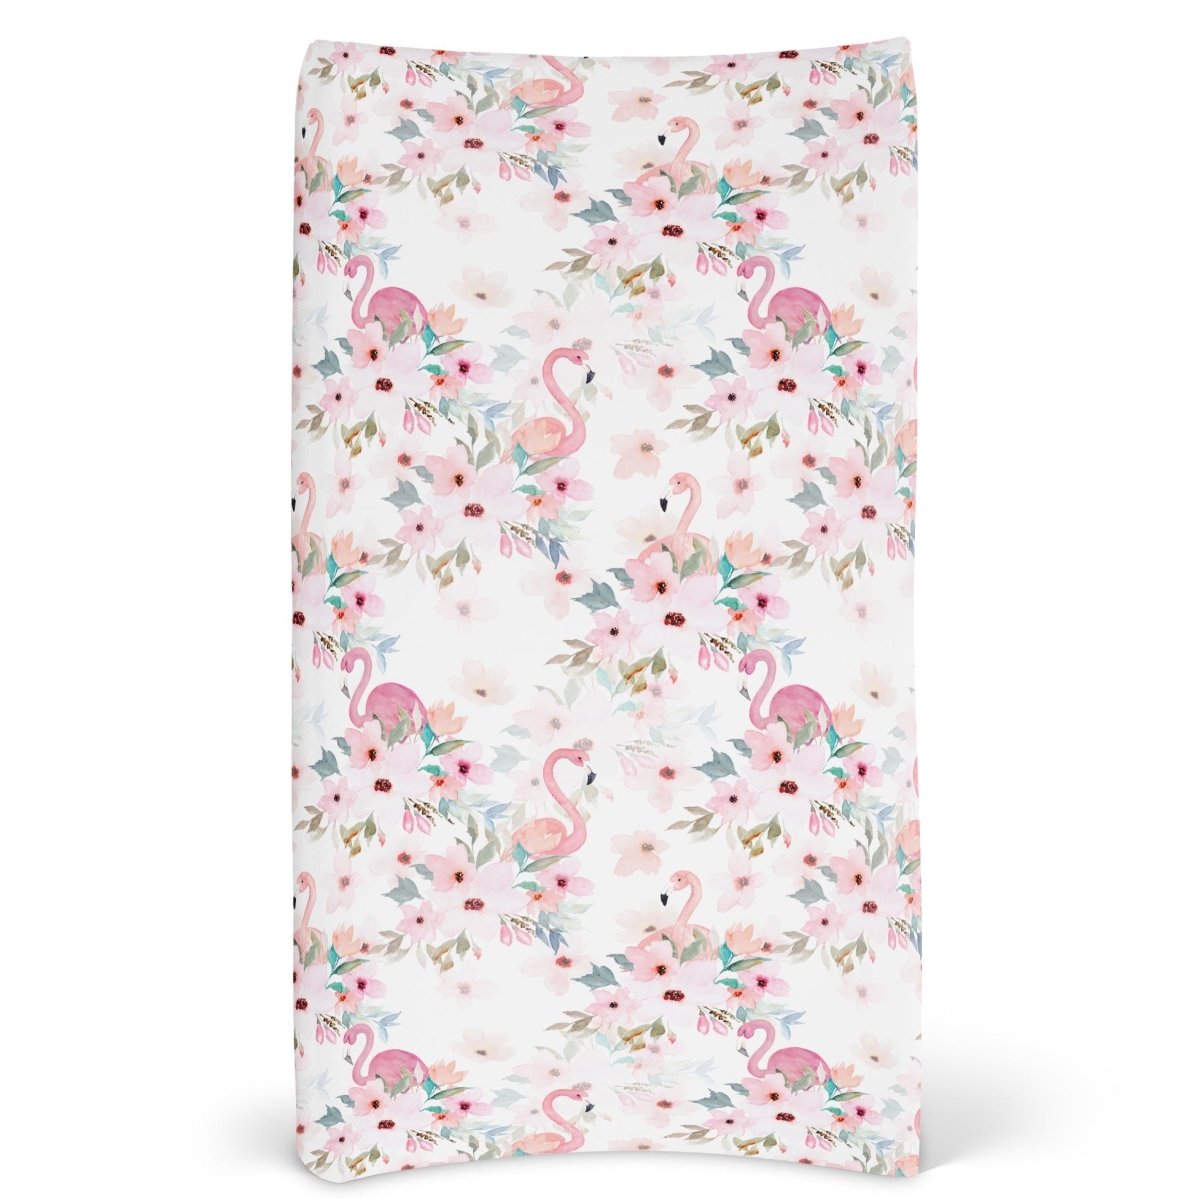 Flamingo Floral Changing Pad Cover - Flamingo Floral, gender_girl, Theme_Floral